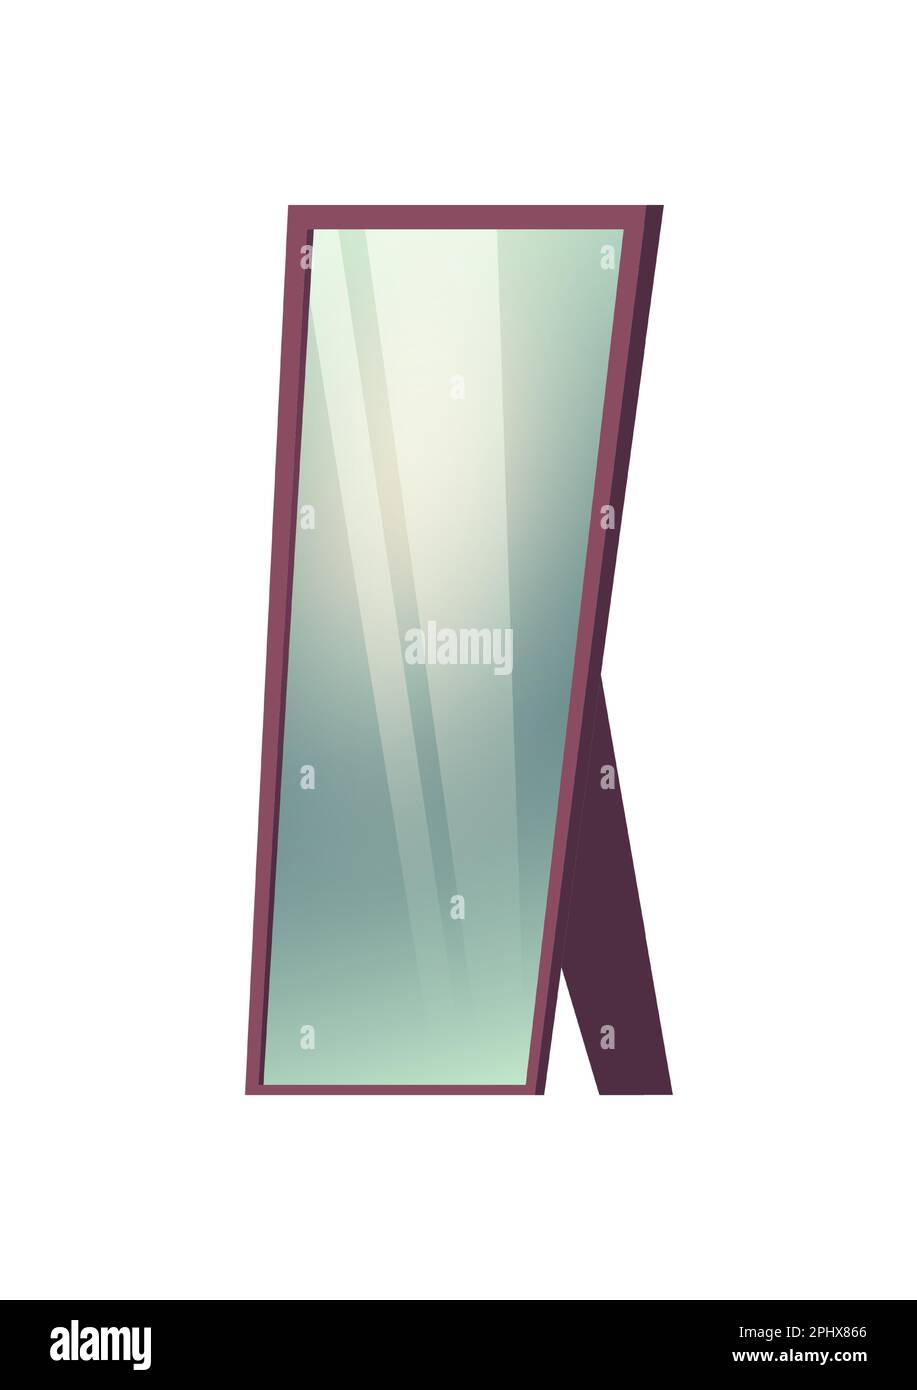 Standing floor mirror isolated on white background. Vector cartoon illustration of full length rectrangle mirror with purple frame and glass surface for dressing room interior Stock Vector